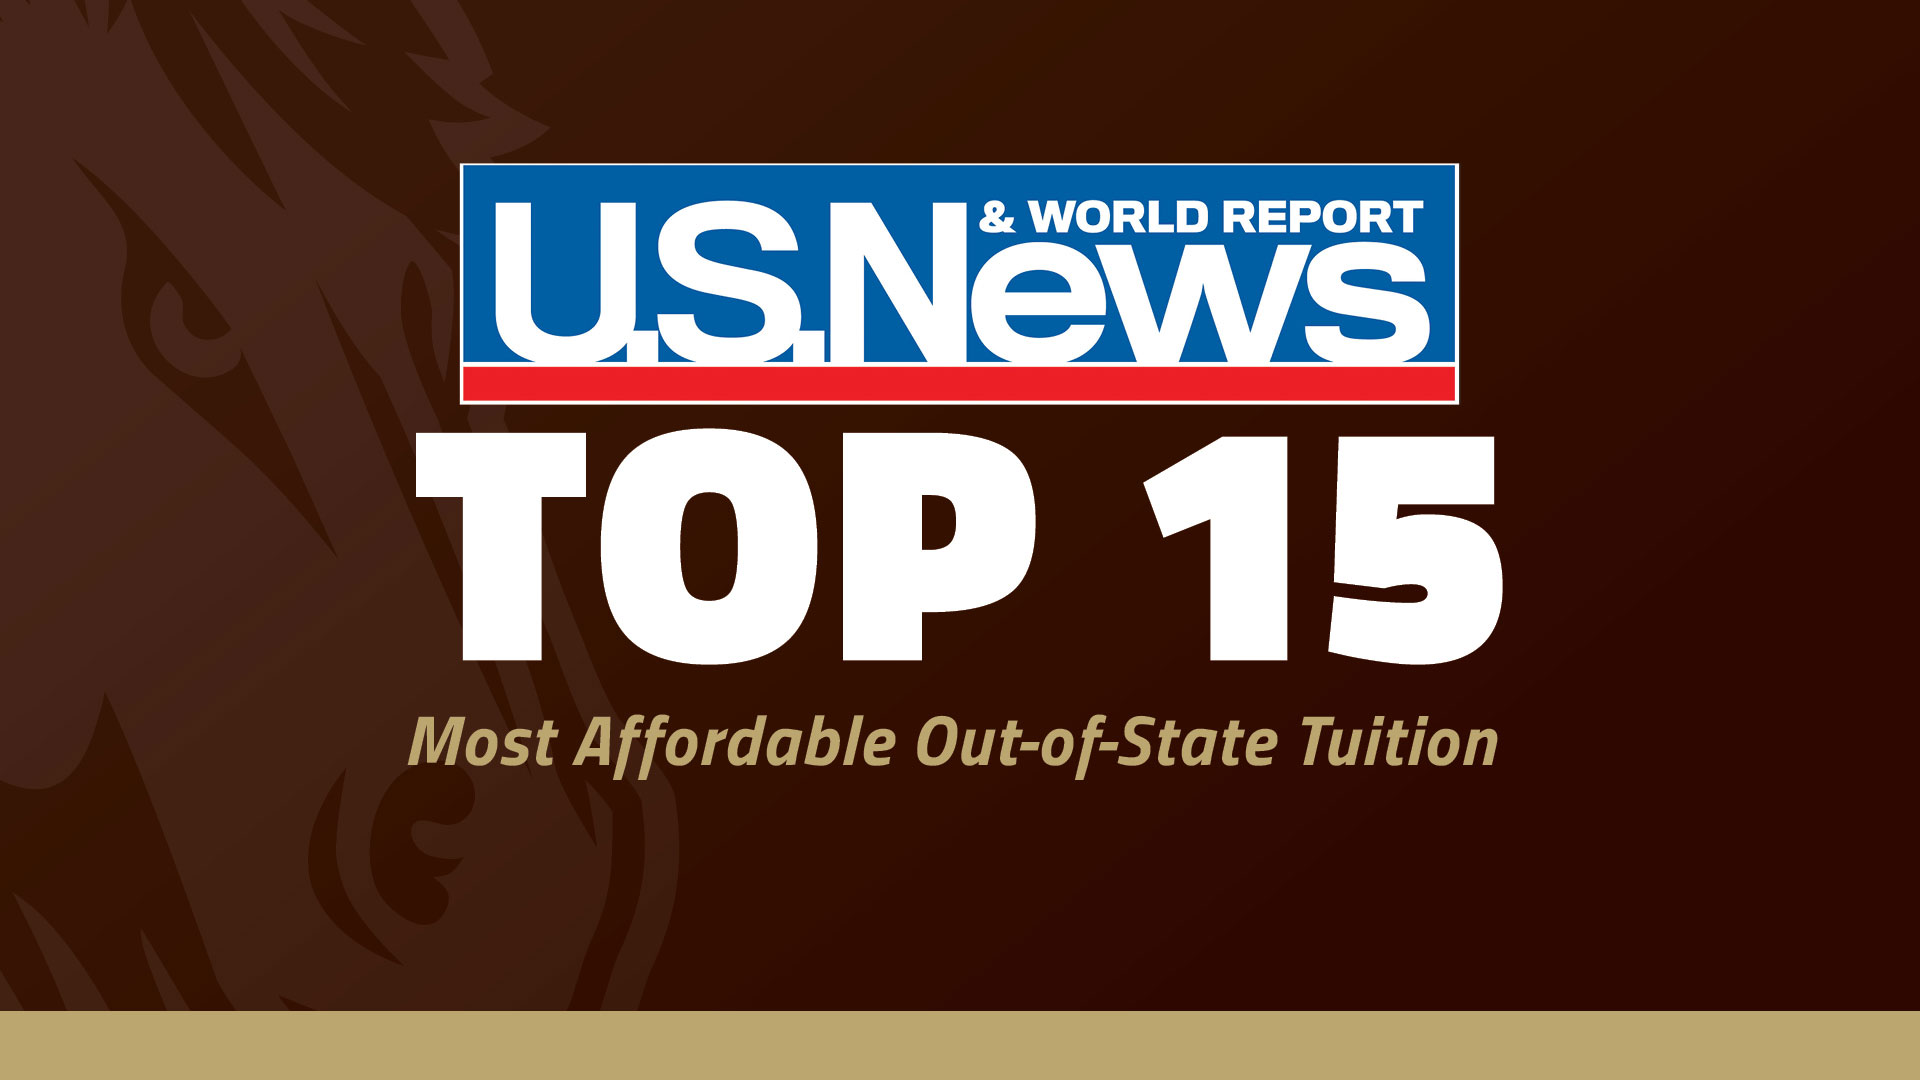 SMSU Ranked Top 15 for Out-of-State Tuition